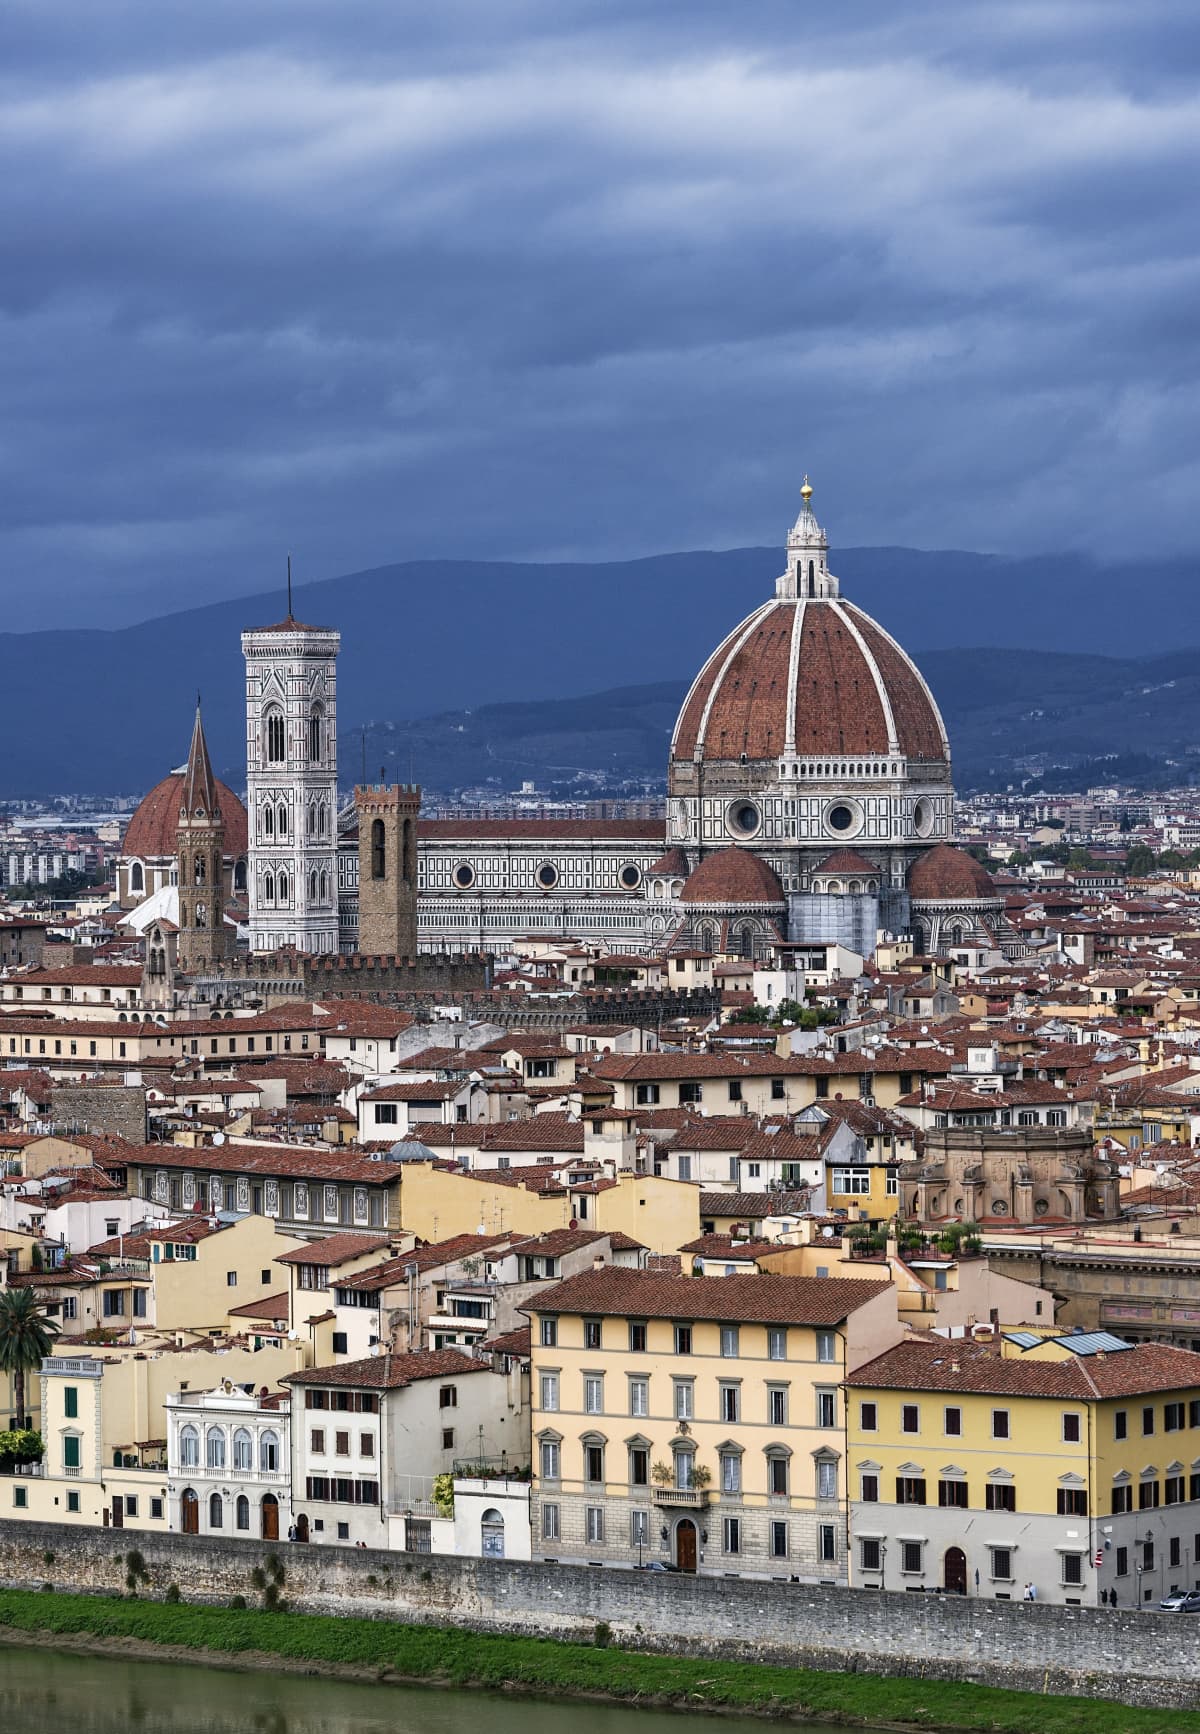 FLORENCE, TUSCANY, ITALY - 2013/11/03: Panoramic view of city and the Duomo architecture. (Photo by John Greim/LightRocket via Getty Images)